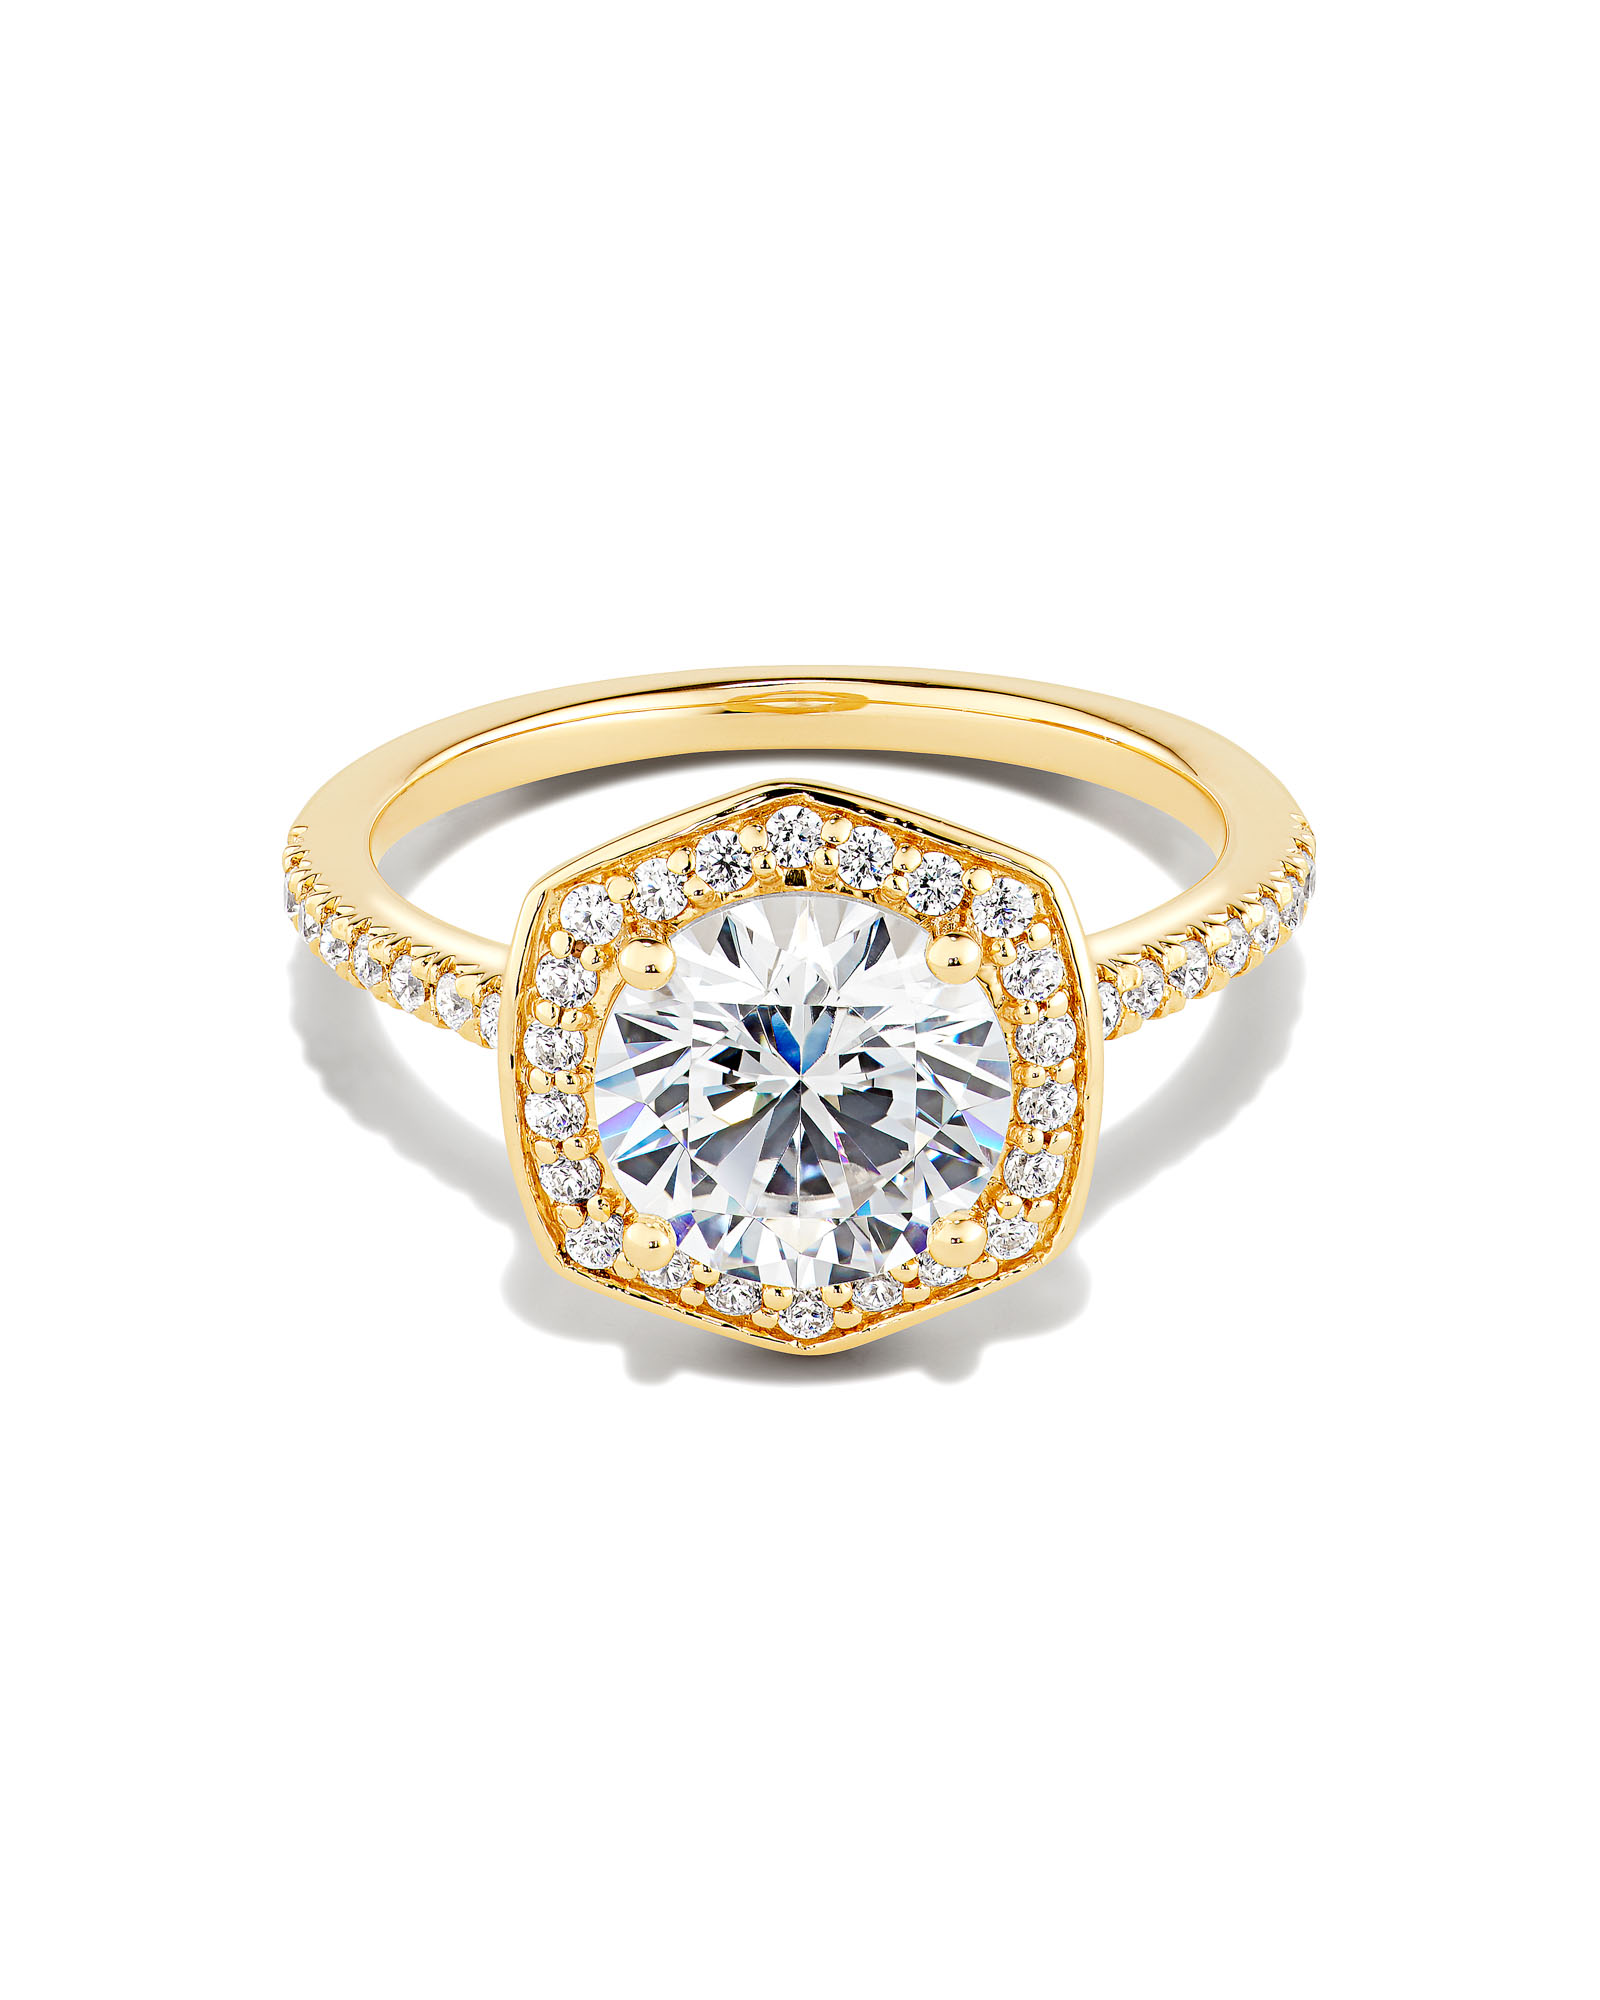 Round Iconic Halo Engagement Ring in 14k Yellow Gold | Kendra Scott